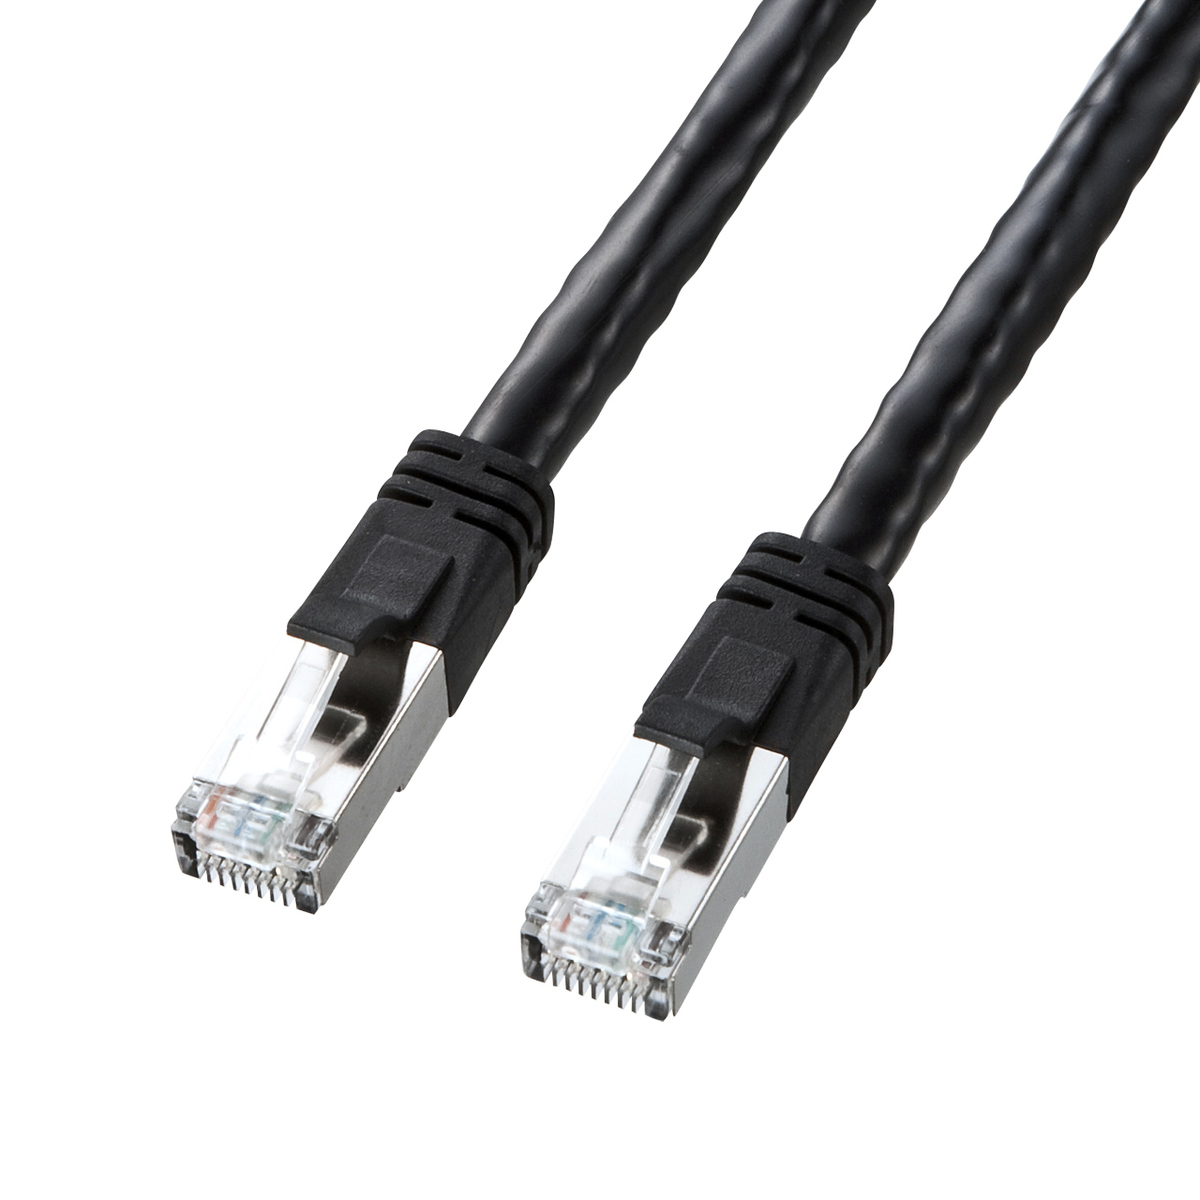 PoE CAT6 LAN Cable, KB-T6POE Series